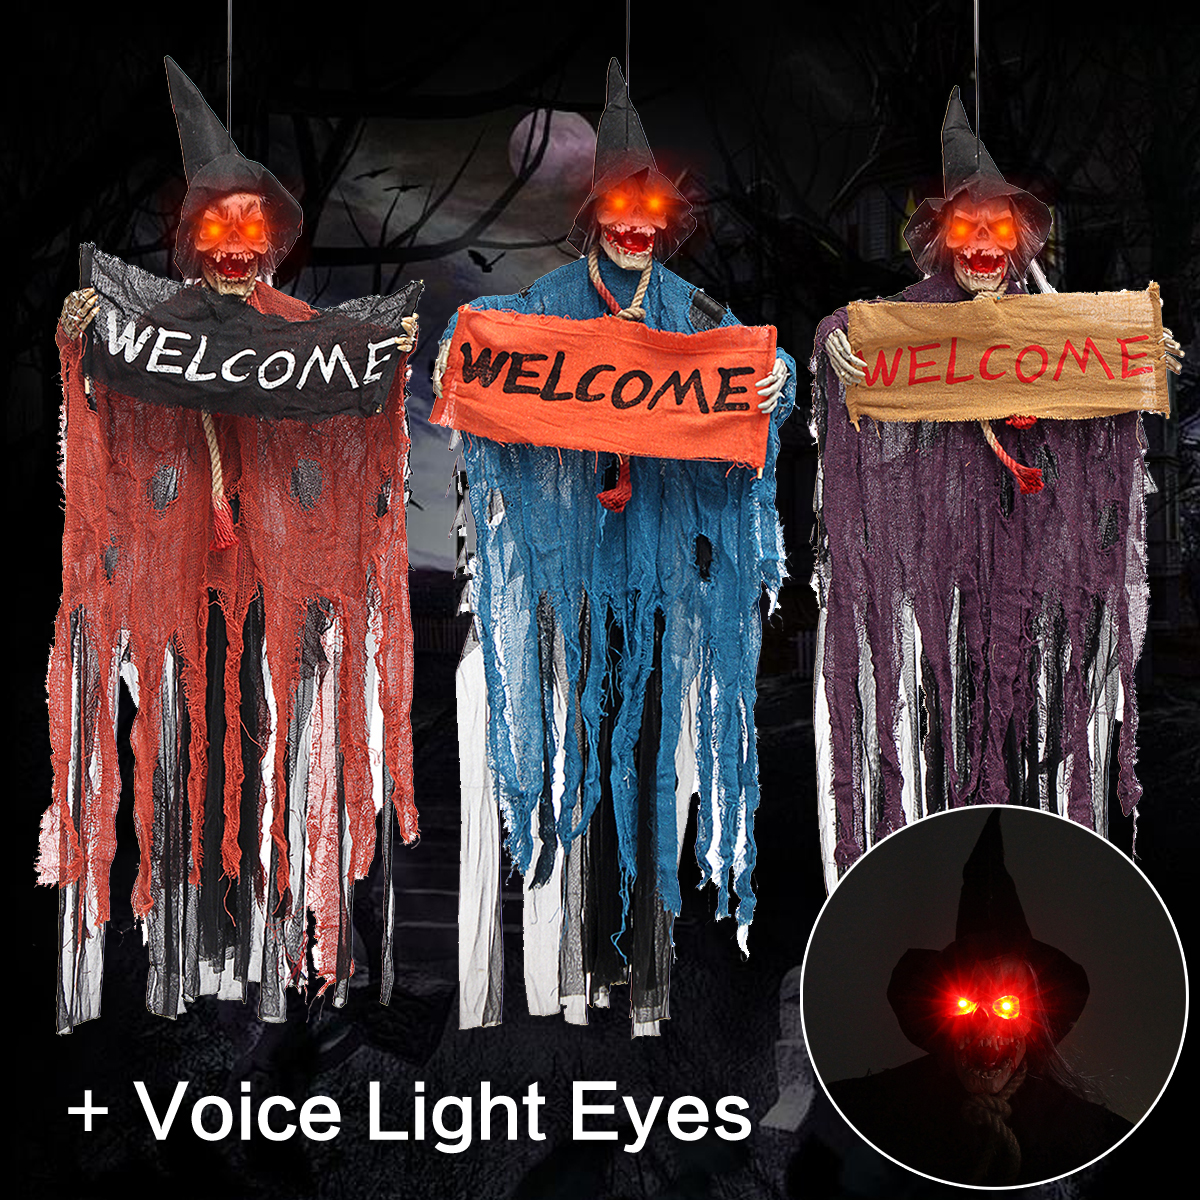 Halloween-Tools-Scary-Welcome-Sign-Hanging-Skeleton-Voice-Lights-Eyes-for-Halloween-Decorations-1340873-1